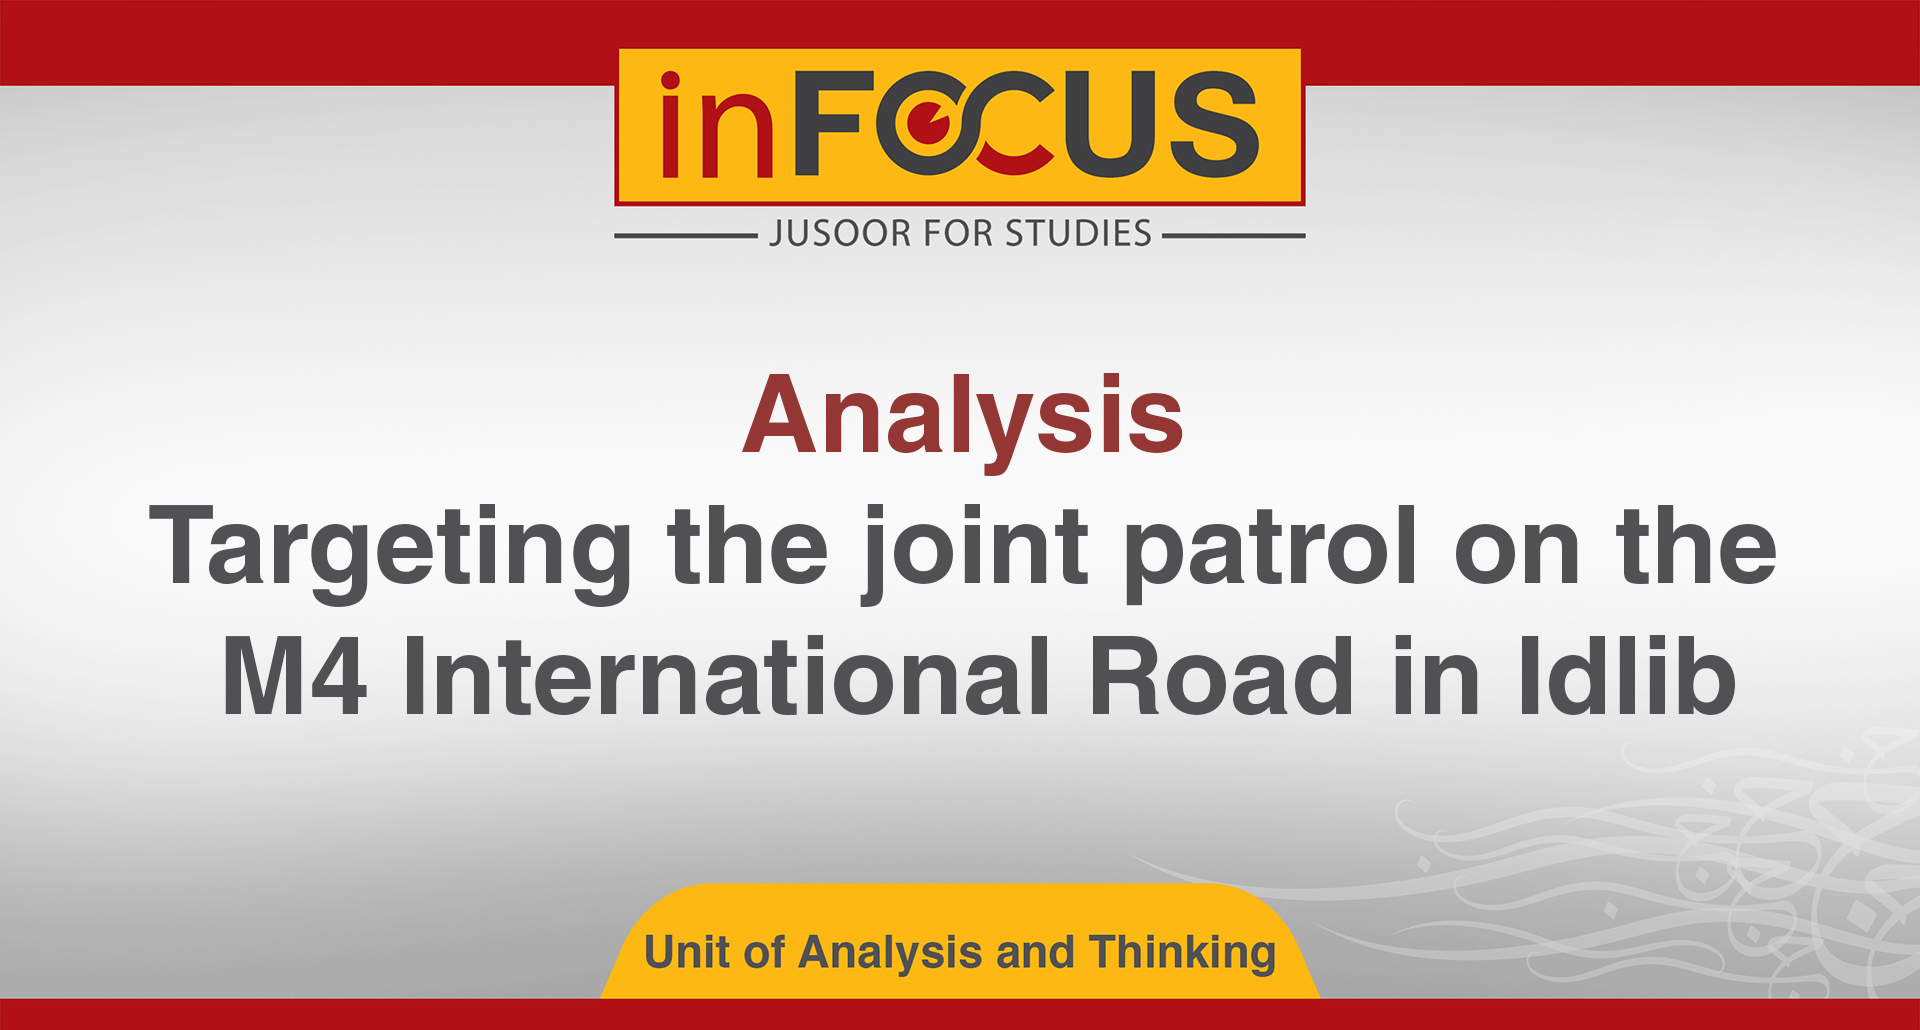 Analysis: Targeting the joint patrol on the M4 International Road in Idlib